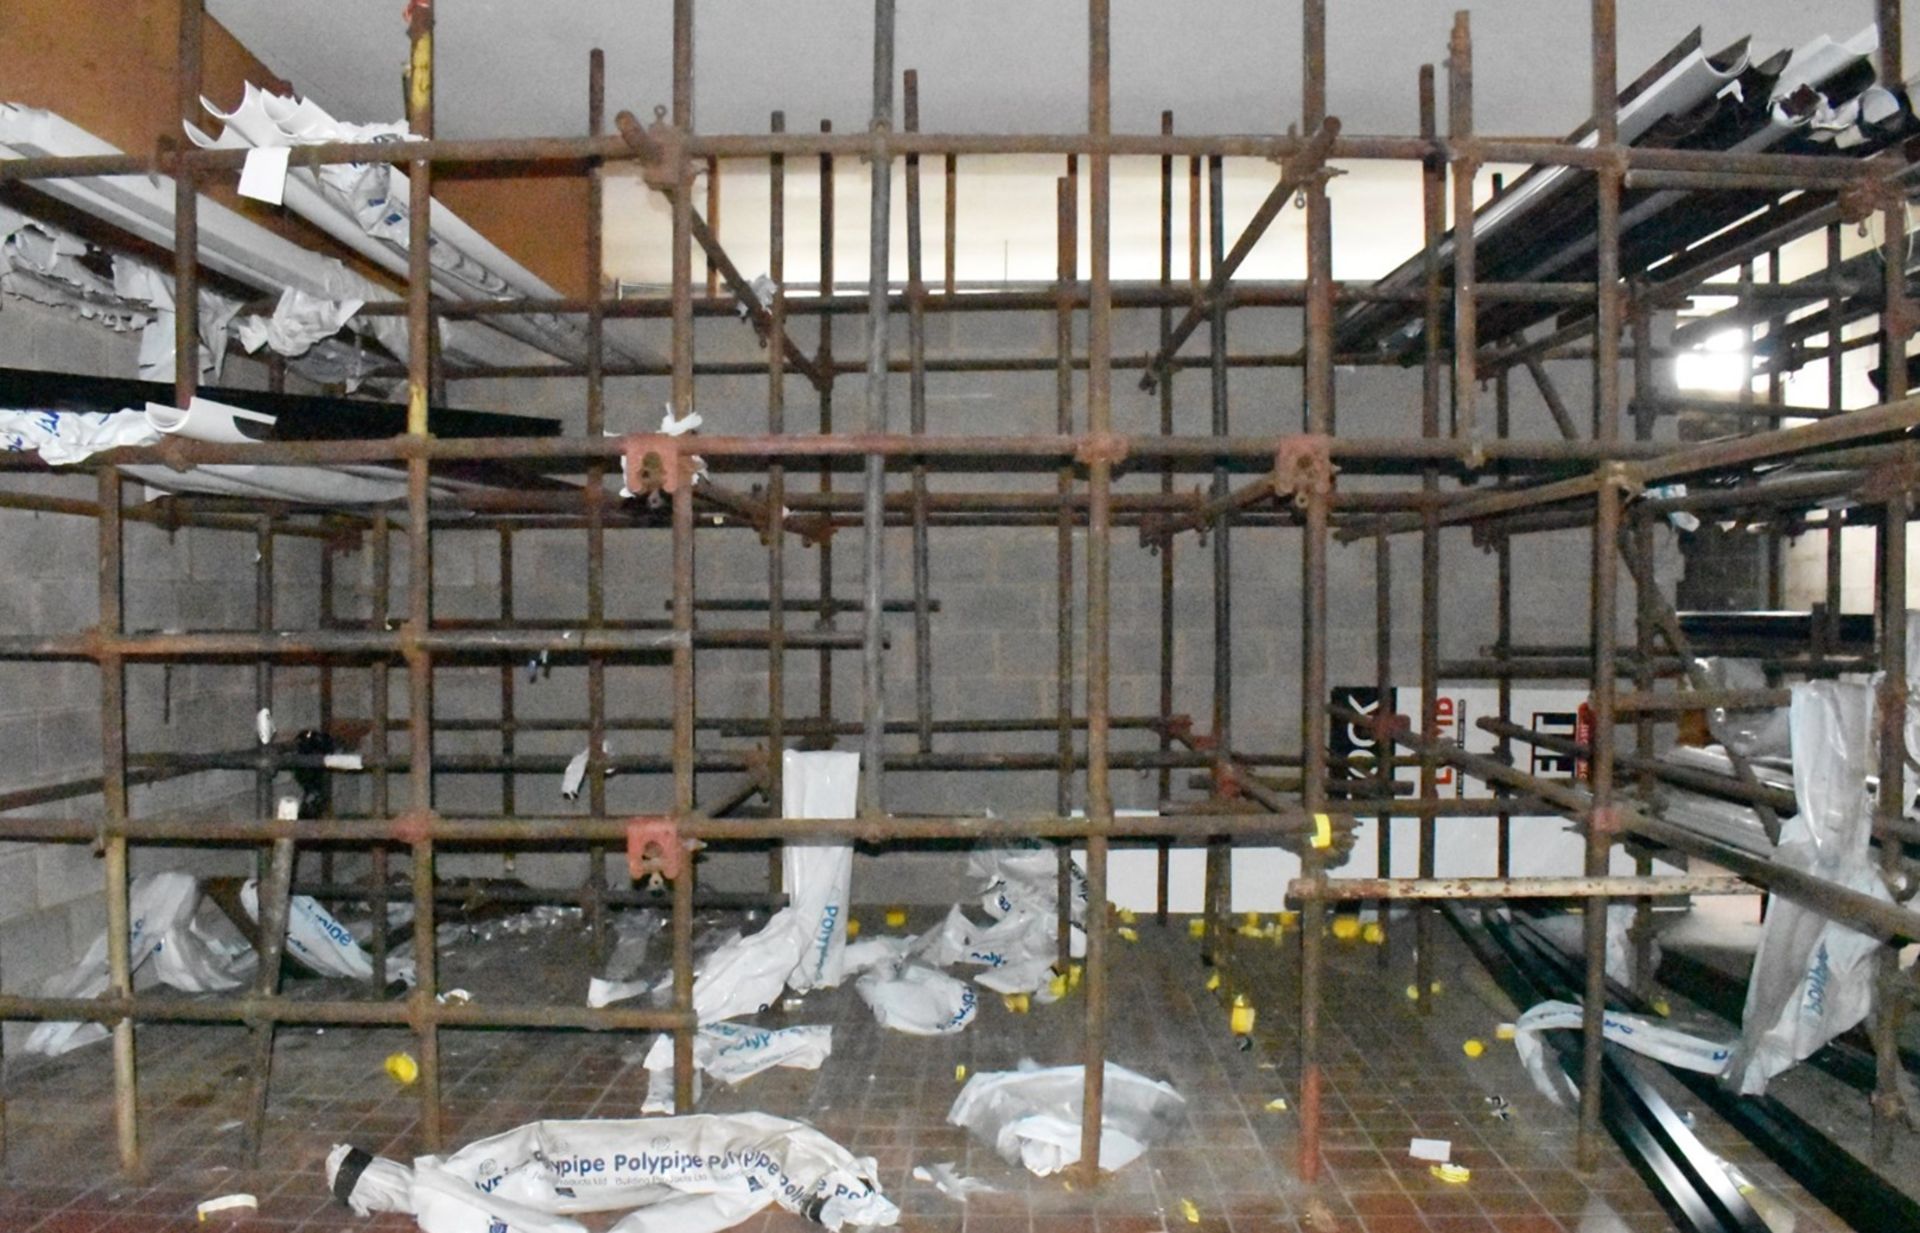 1 x Large Collection of Scaffolding and Fixtures Covering a Floor Space of Approx 13 x 13ft - Image 6 of 15